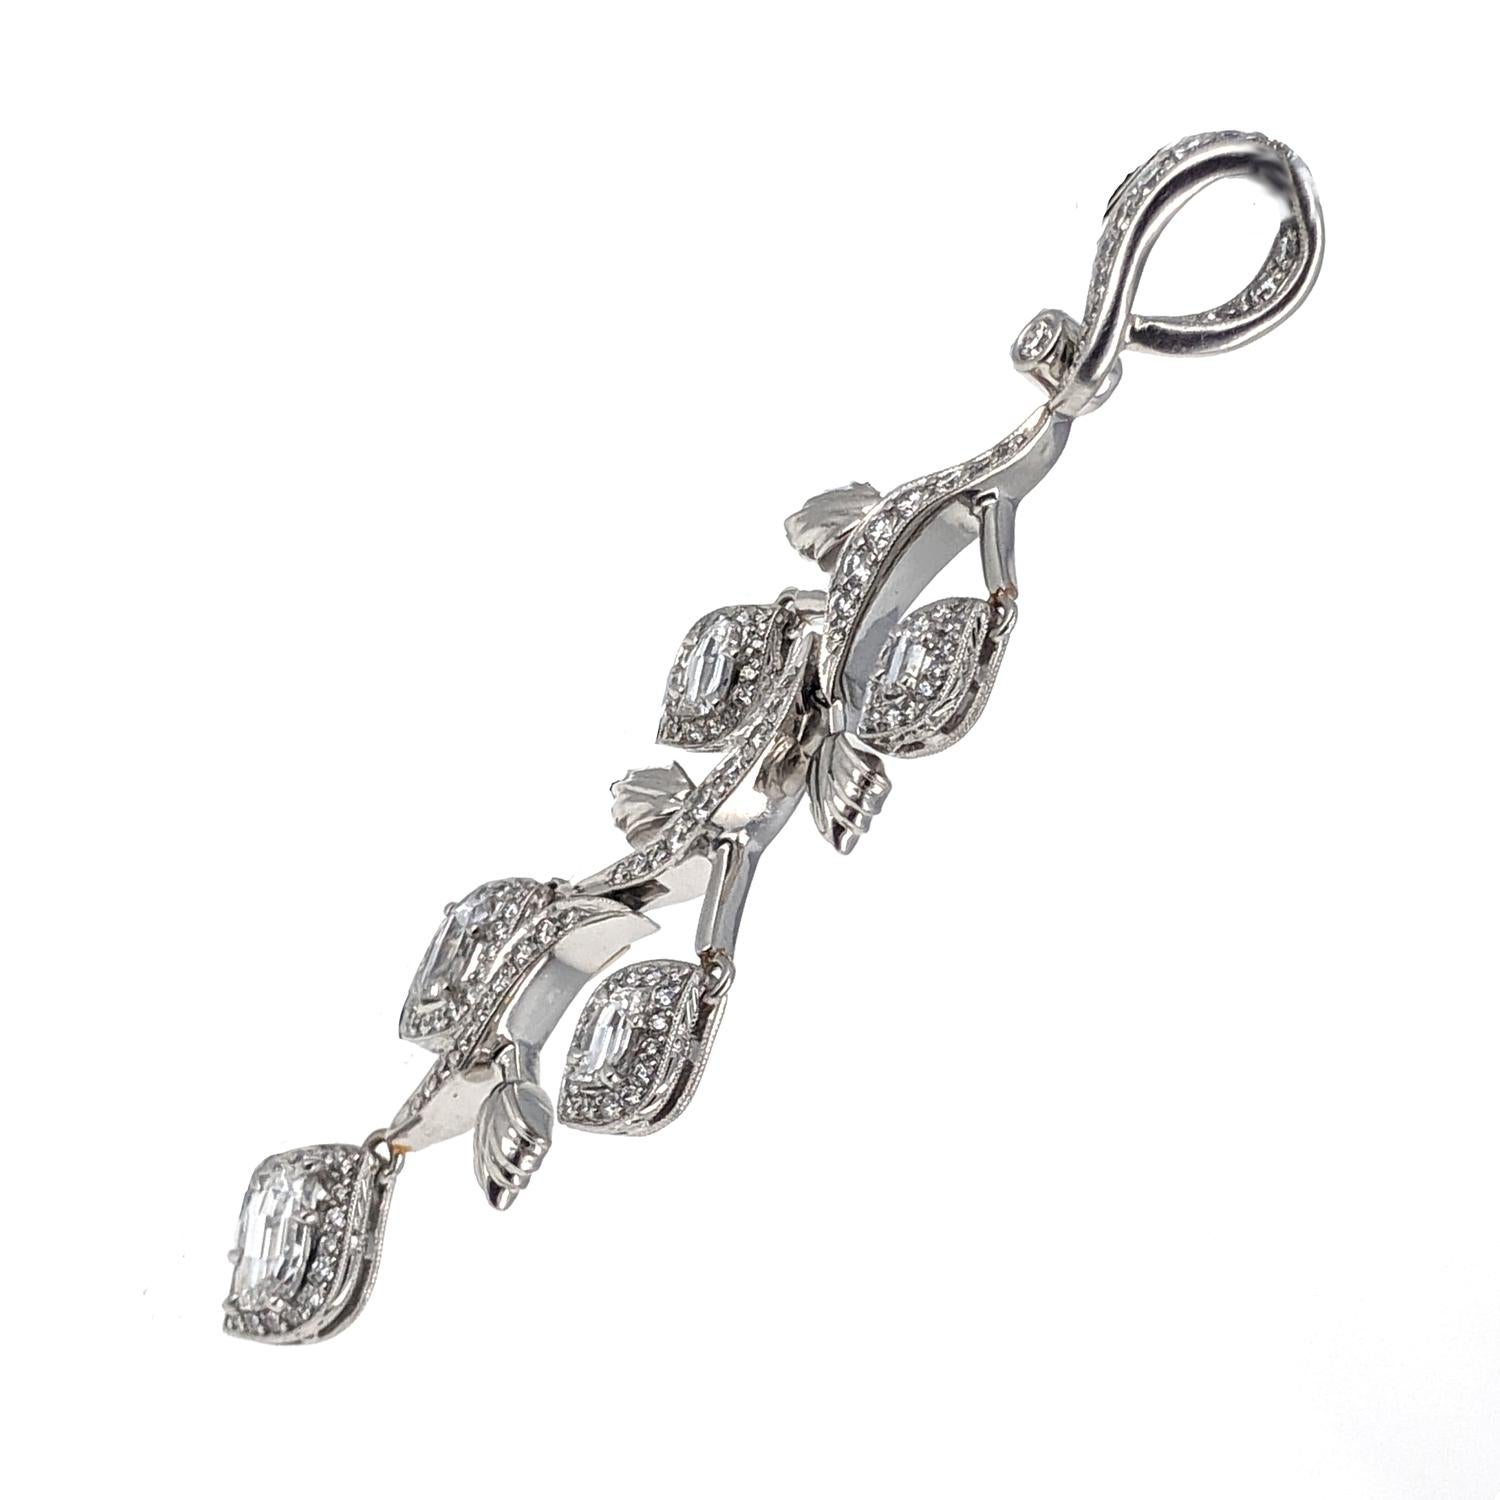 This tapering moveable vine pendant suspends little leaf pendants that are set with larger fancy-shaped diamonds in addition to the small round diamond pave. There is an estimated 4 carats of diamonds all set into the millegrain 18 karat white gold